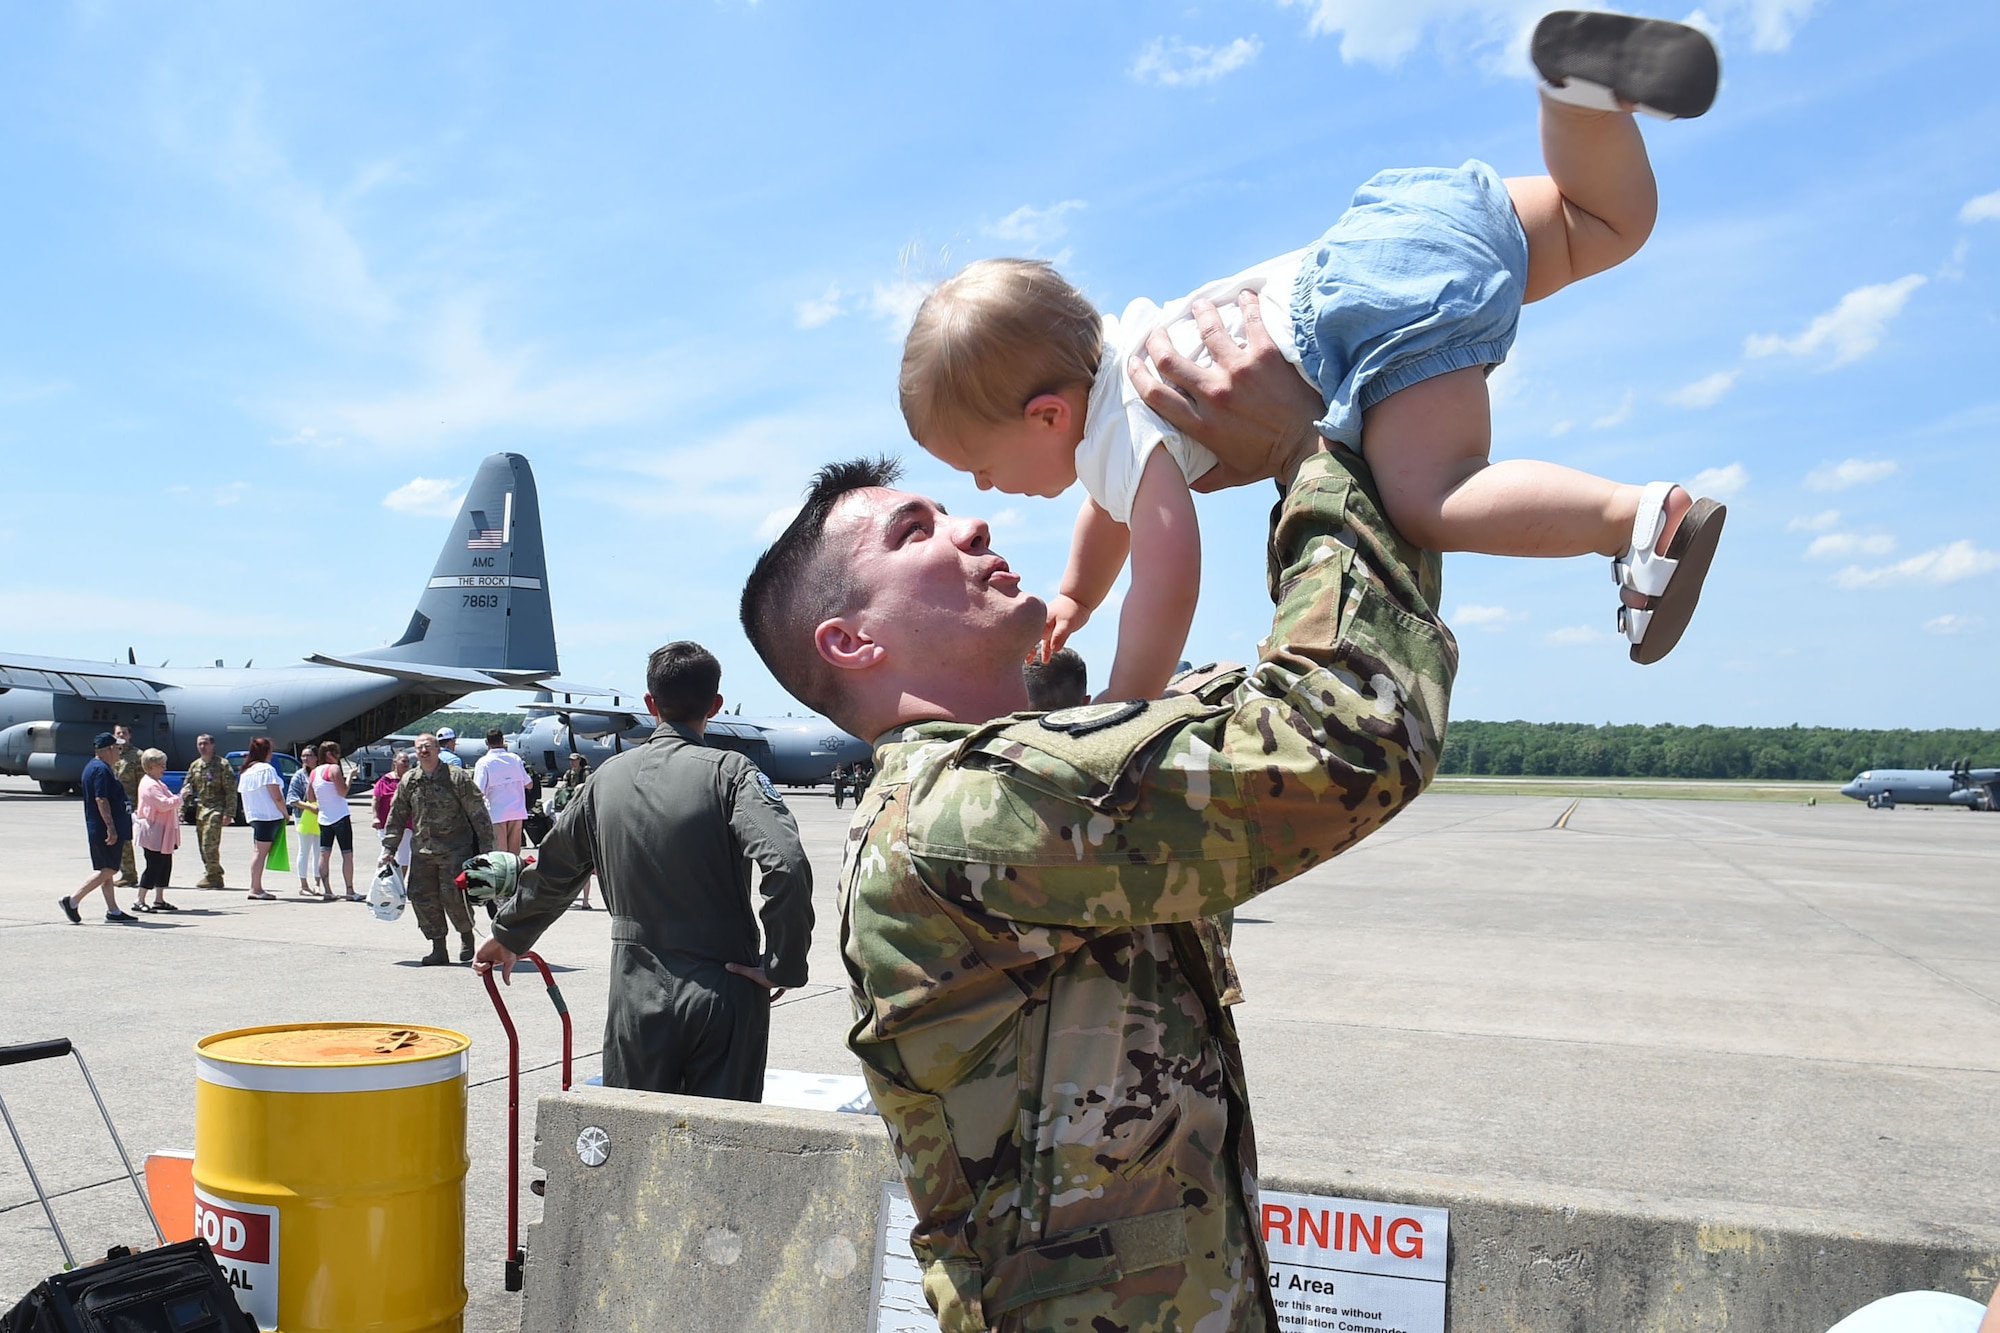 An Airman picks his son up off the ground.